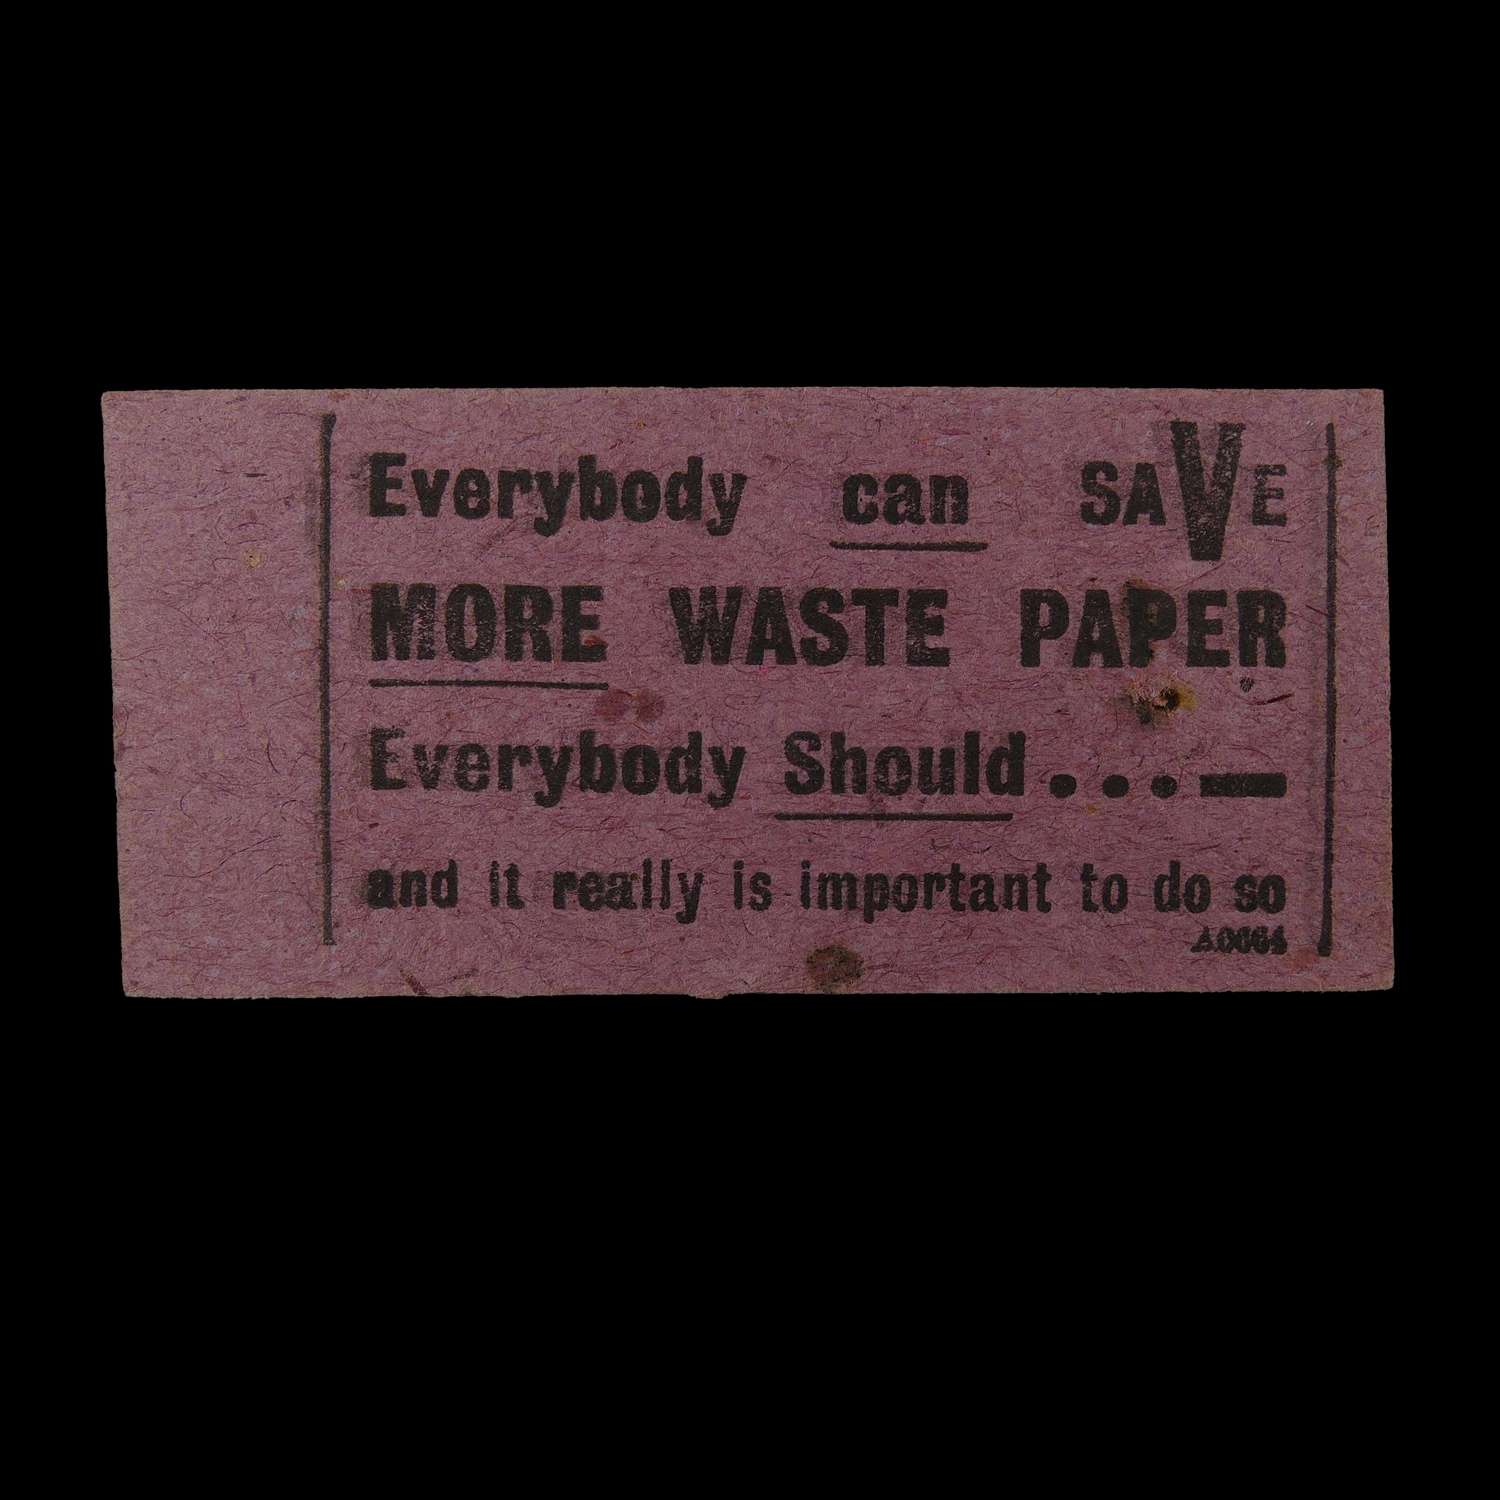 Wartime bus tickets with salvage message